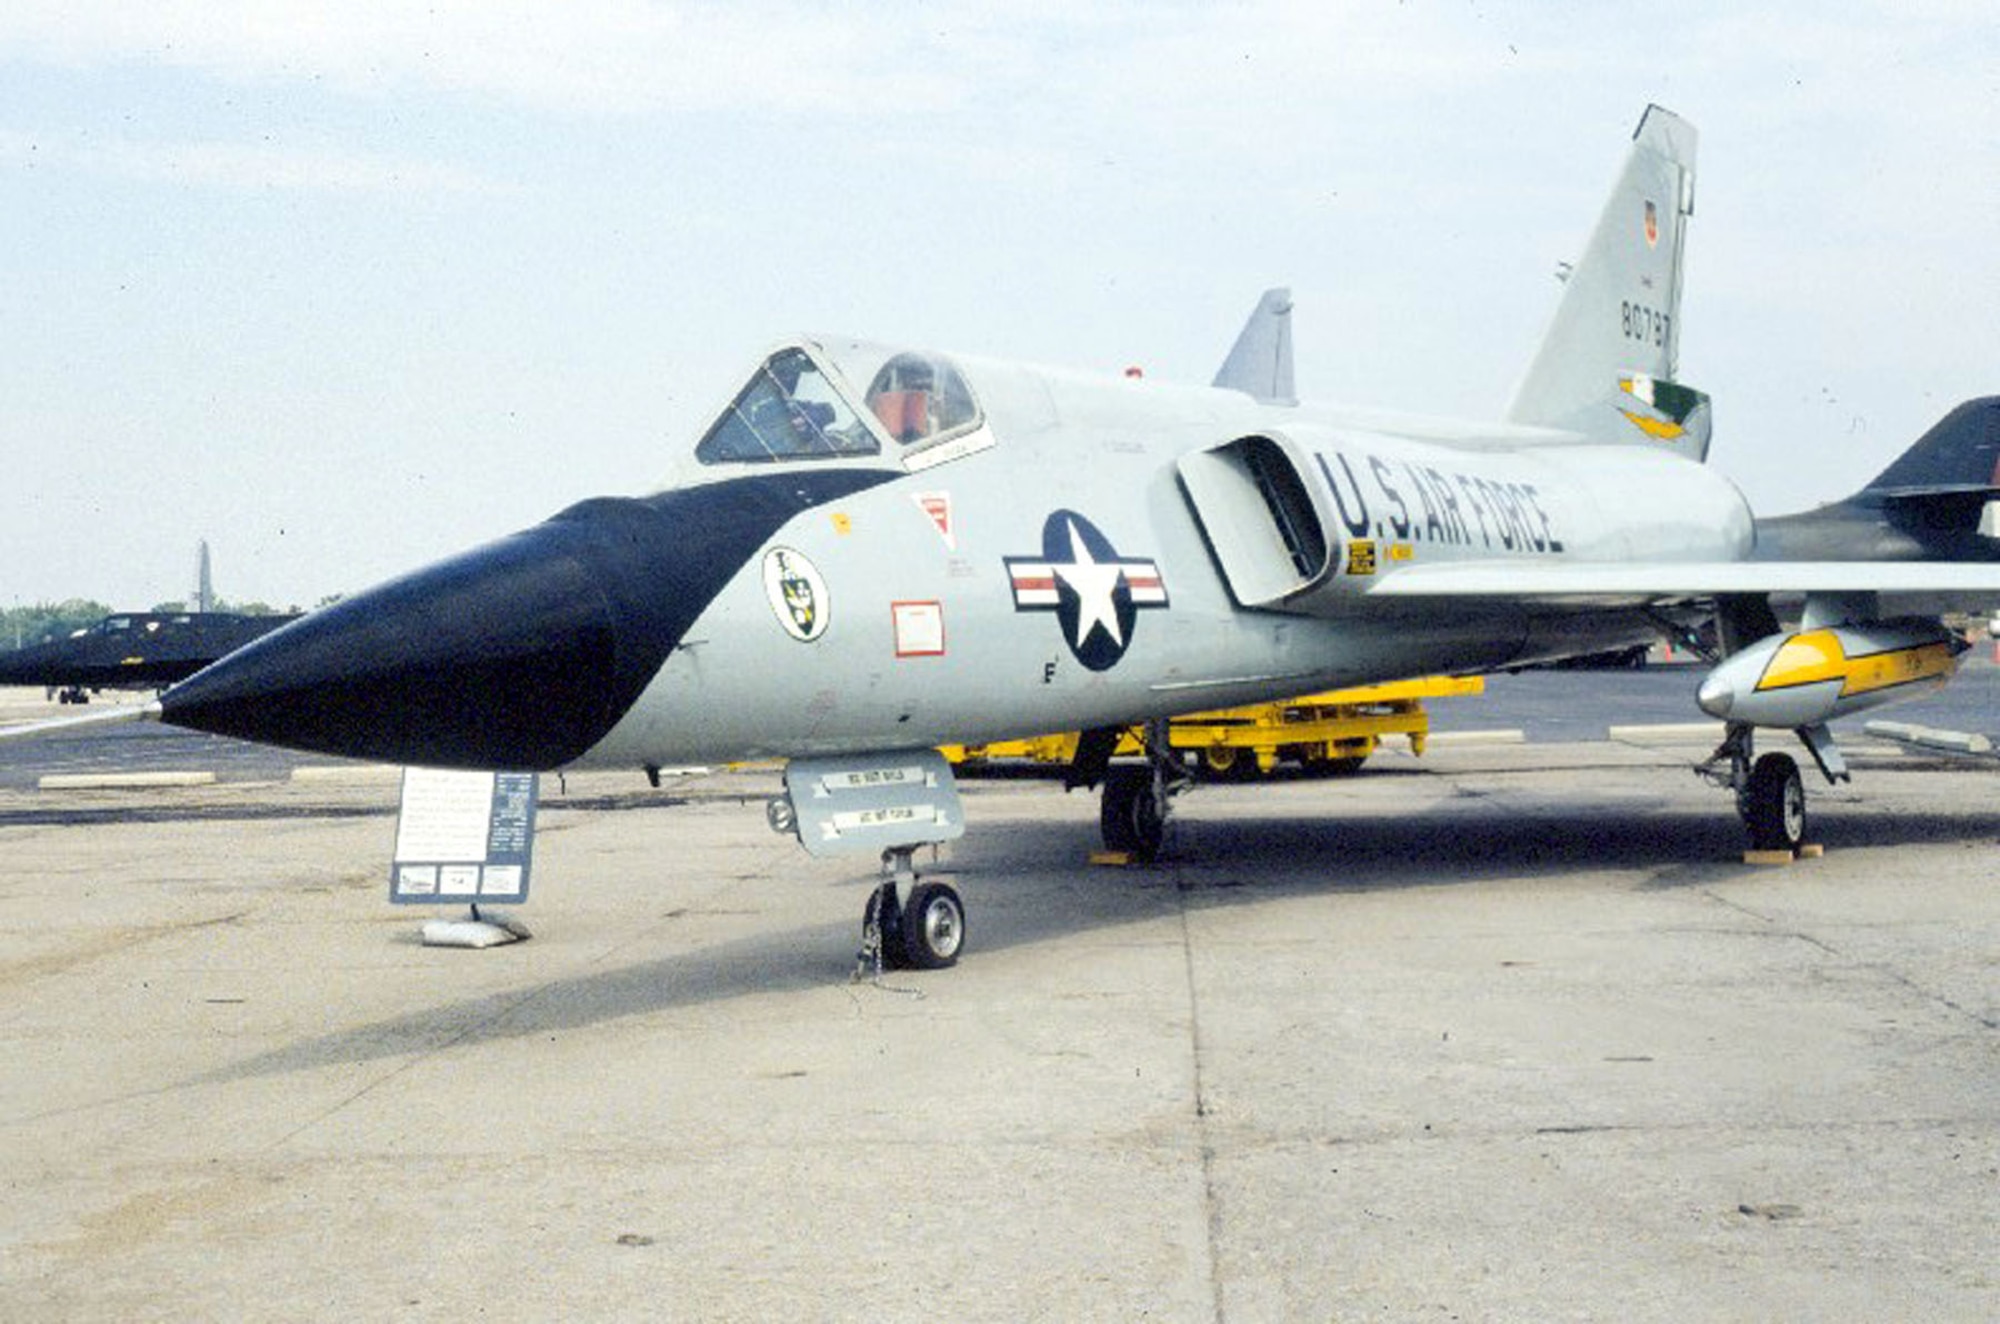 DAYTON, Ohio -- Convair F-106A Delta Dart at the National Museum of the United States Air Force. (U.S. Air Force photo)